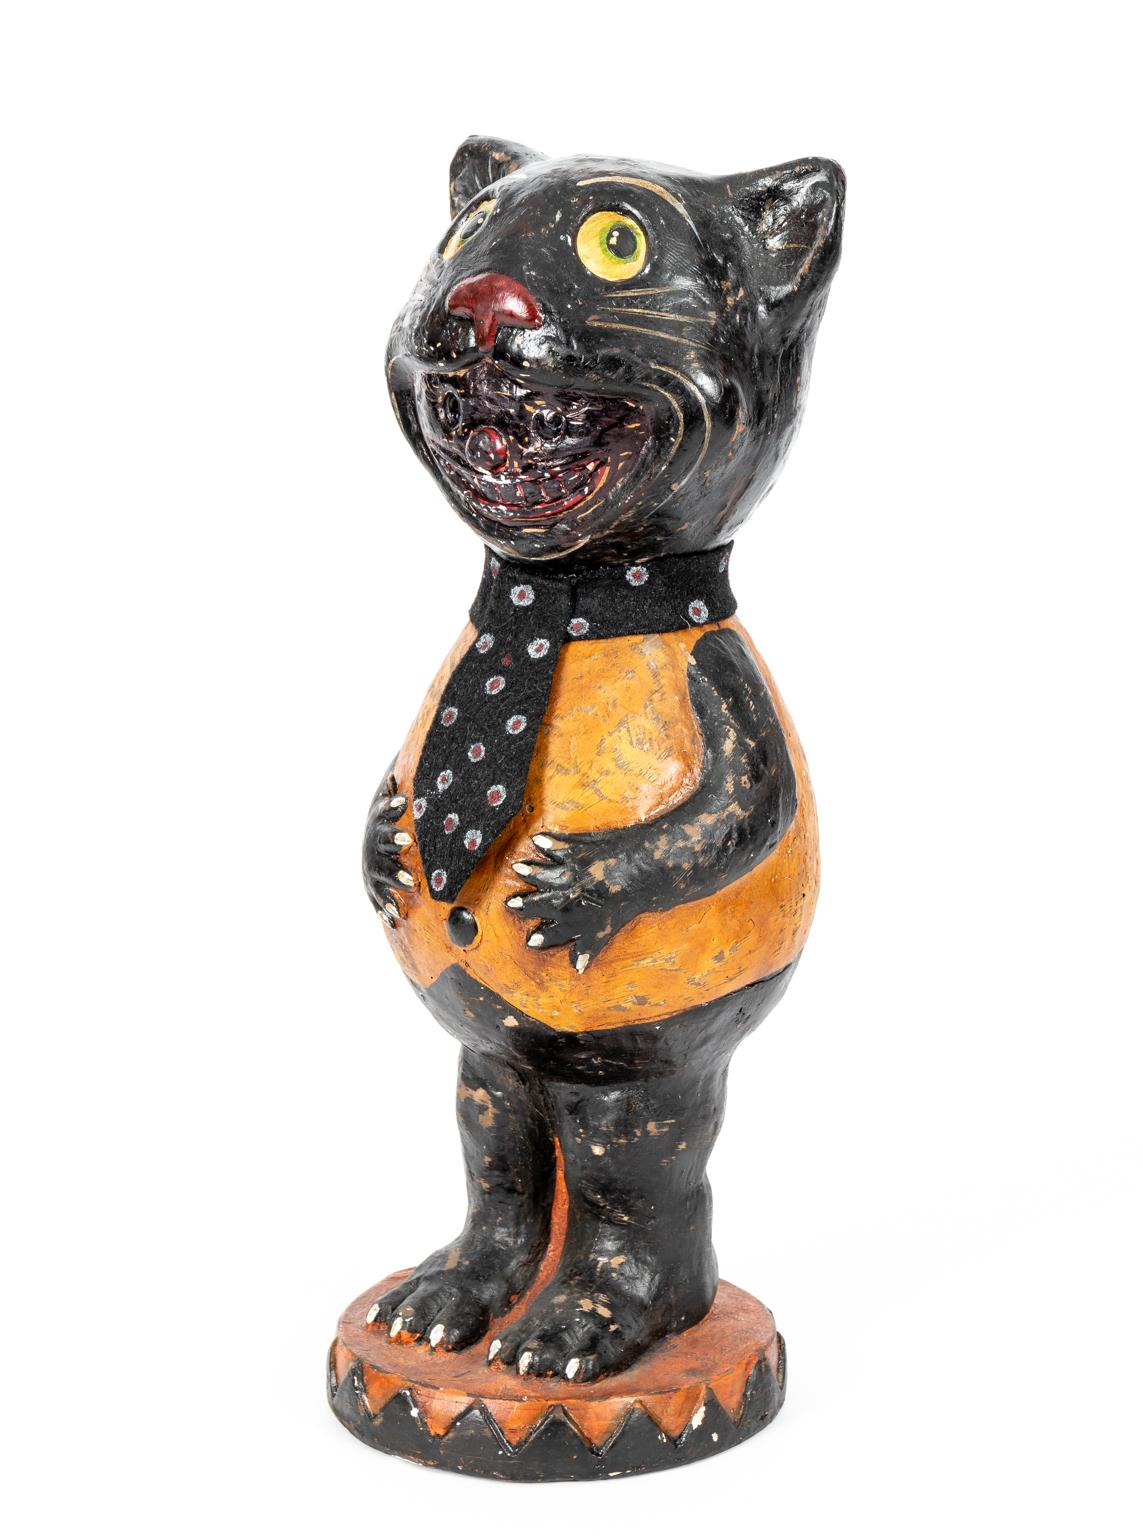 Vintage Halloween themed Papier Mache cat with fabric tie and clown face in its smile. Origin and period of manufacture unknown. Please note of wear consistent with age.